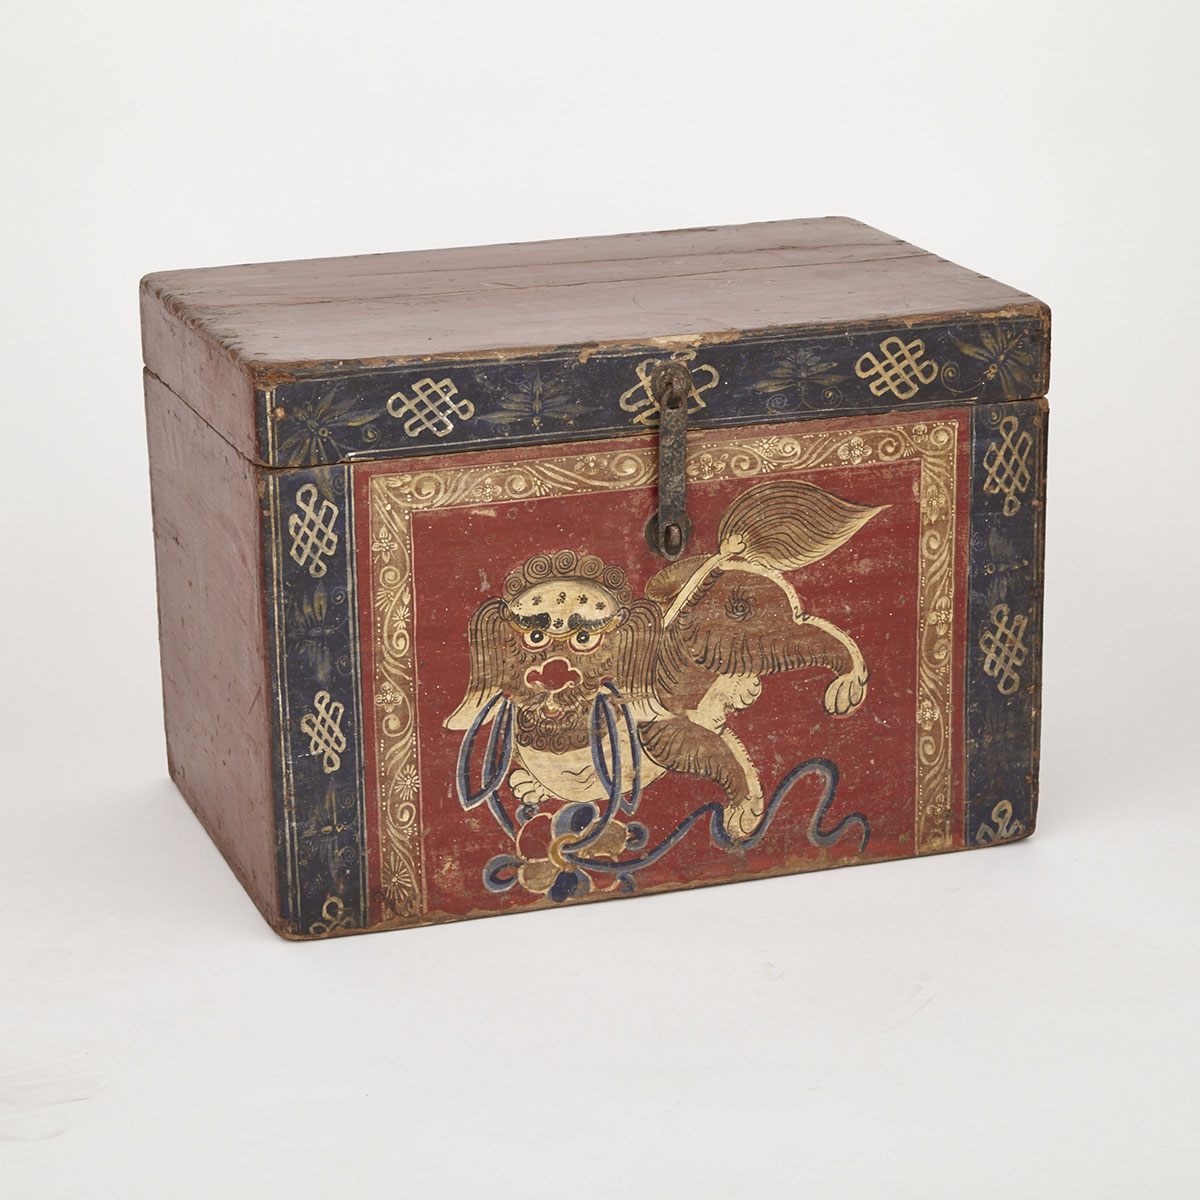 Painted Wood Box, 18th/19th Century